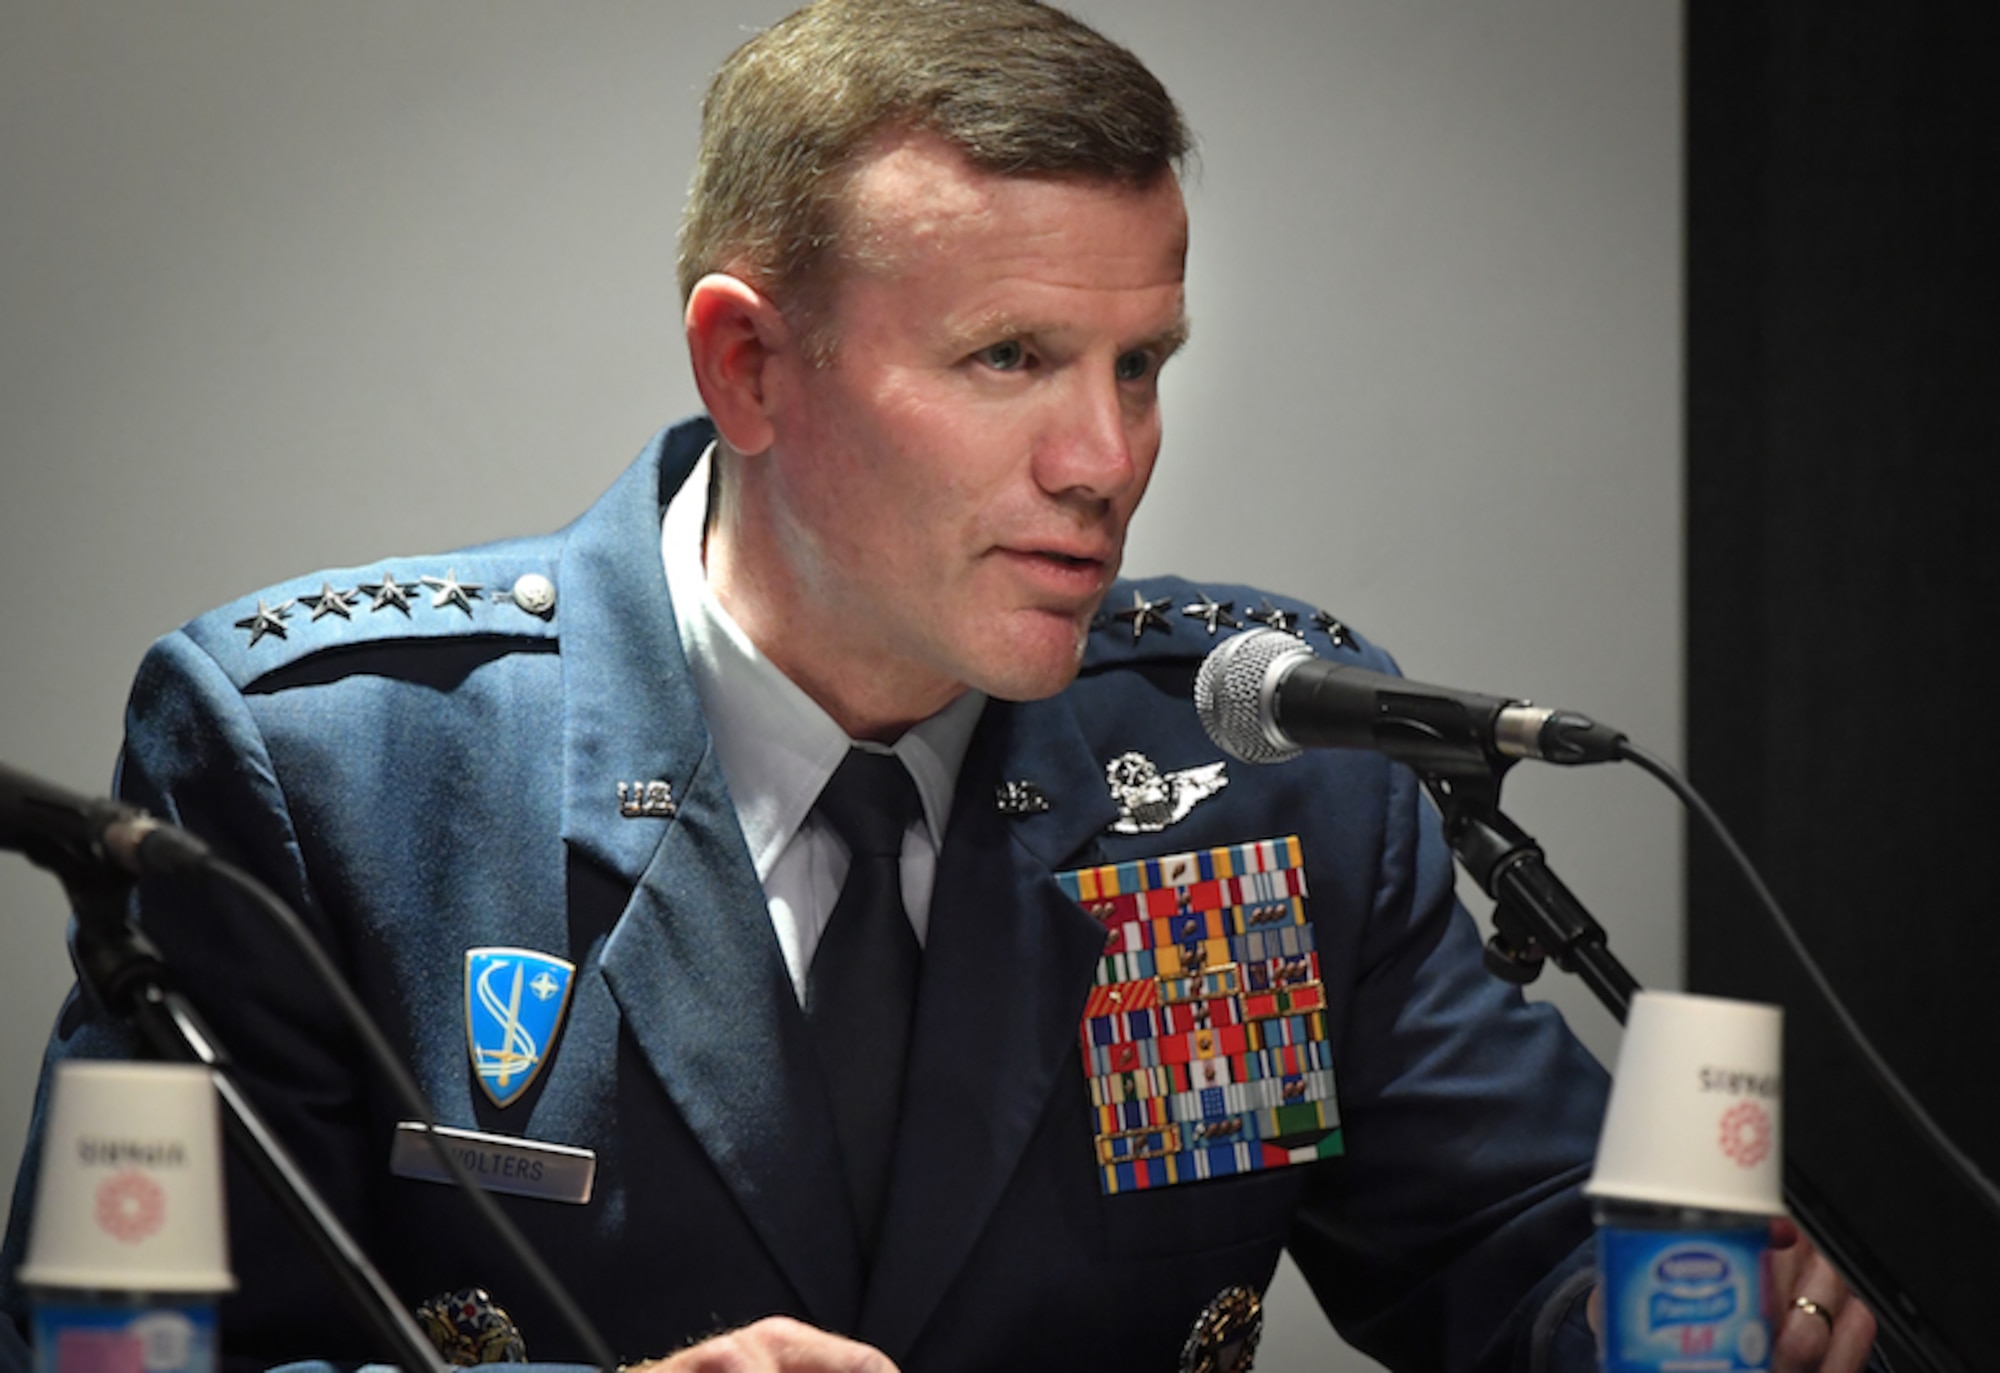 Gen. Tod D. Wolters, U.S. Air Forces in Europe and Air Forces Africa commander, answers questions during a media event at the Paris Air Show, June 19, 2017 at Le Bourget, France. Held every year, the Paris Air Show represents a unique opportunity for the United States to showcase its leadership in aerospace technologies. Direct participation in the air show supports U.S. government security policy and strategic defense objectives. (U.S. Air Force photo/ Tech. Sgt. Ryan Crane)